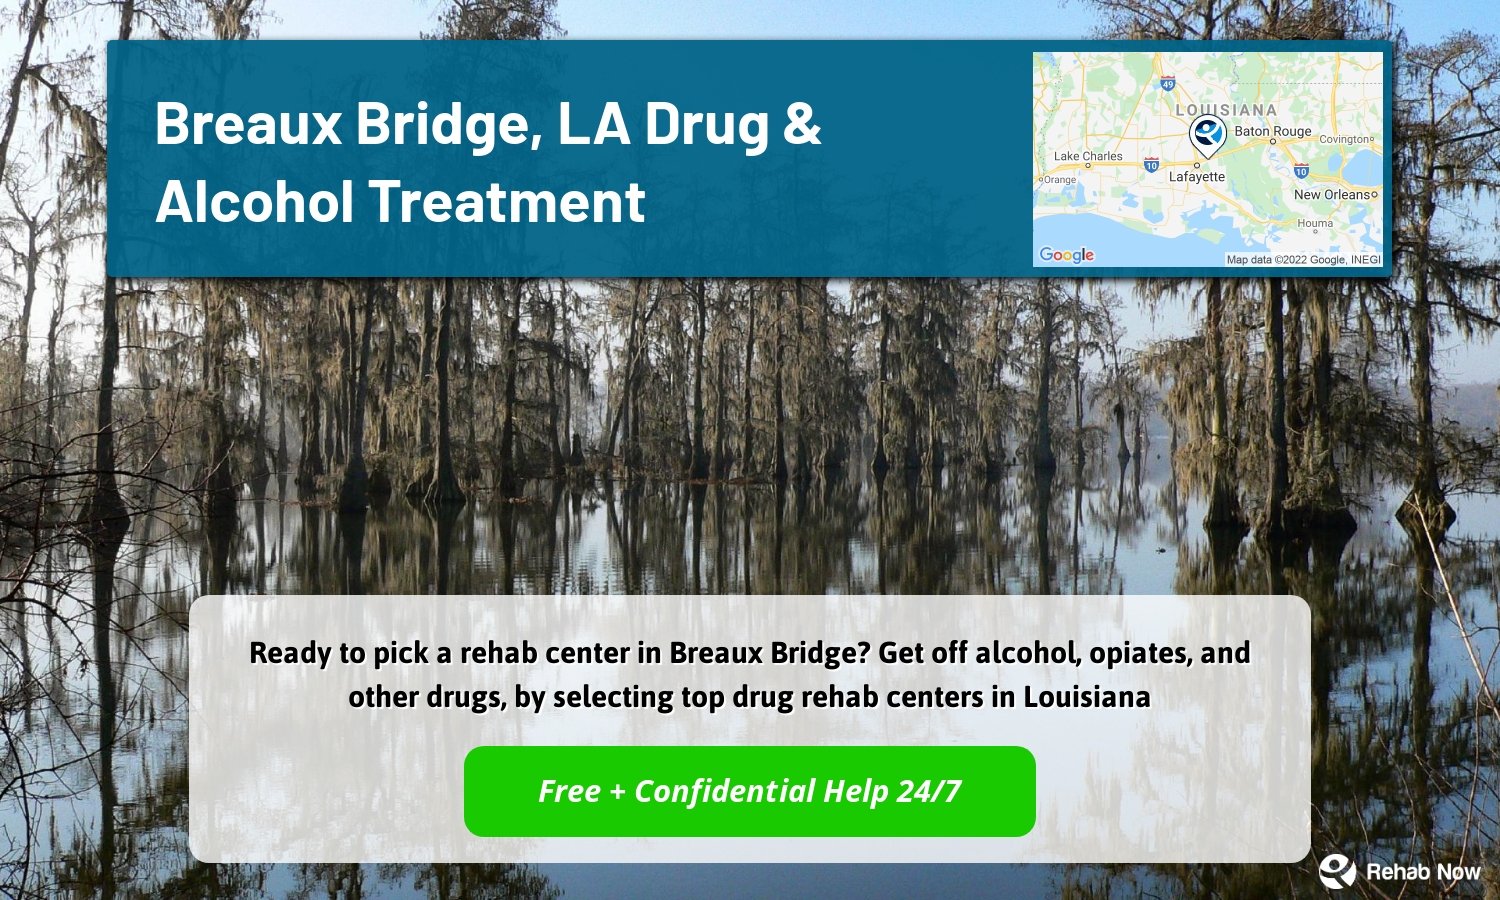 Ready to pick a rehab center in Breaux Bridge? Get off alcohol, opiates, and other drugs, by selecting top drug rehab centers in Louisiana